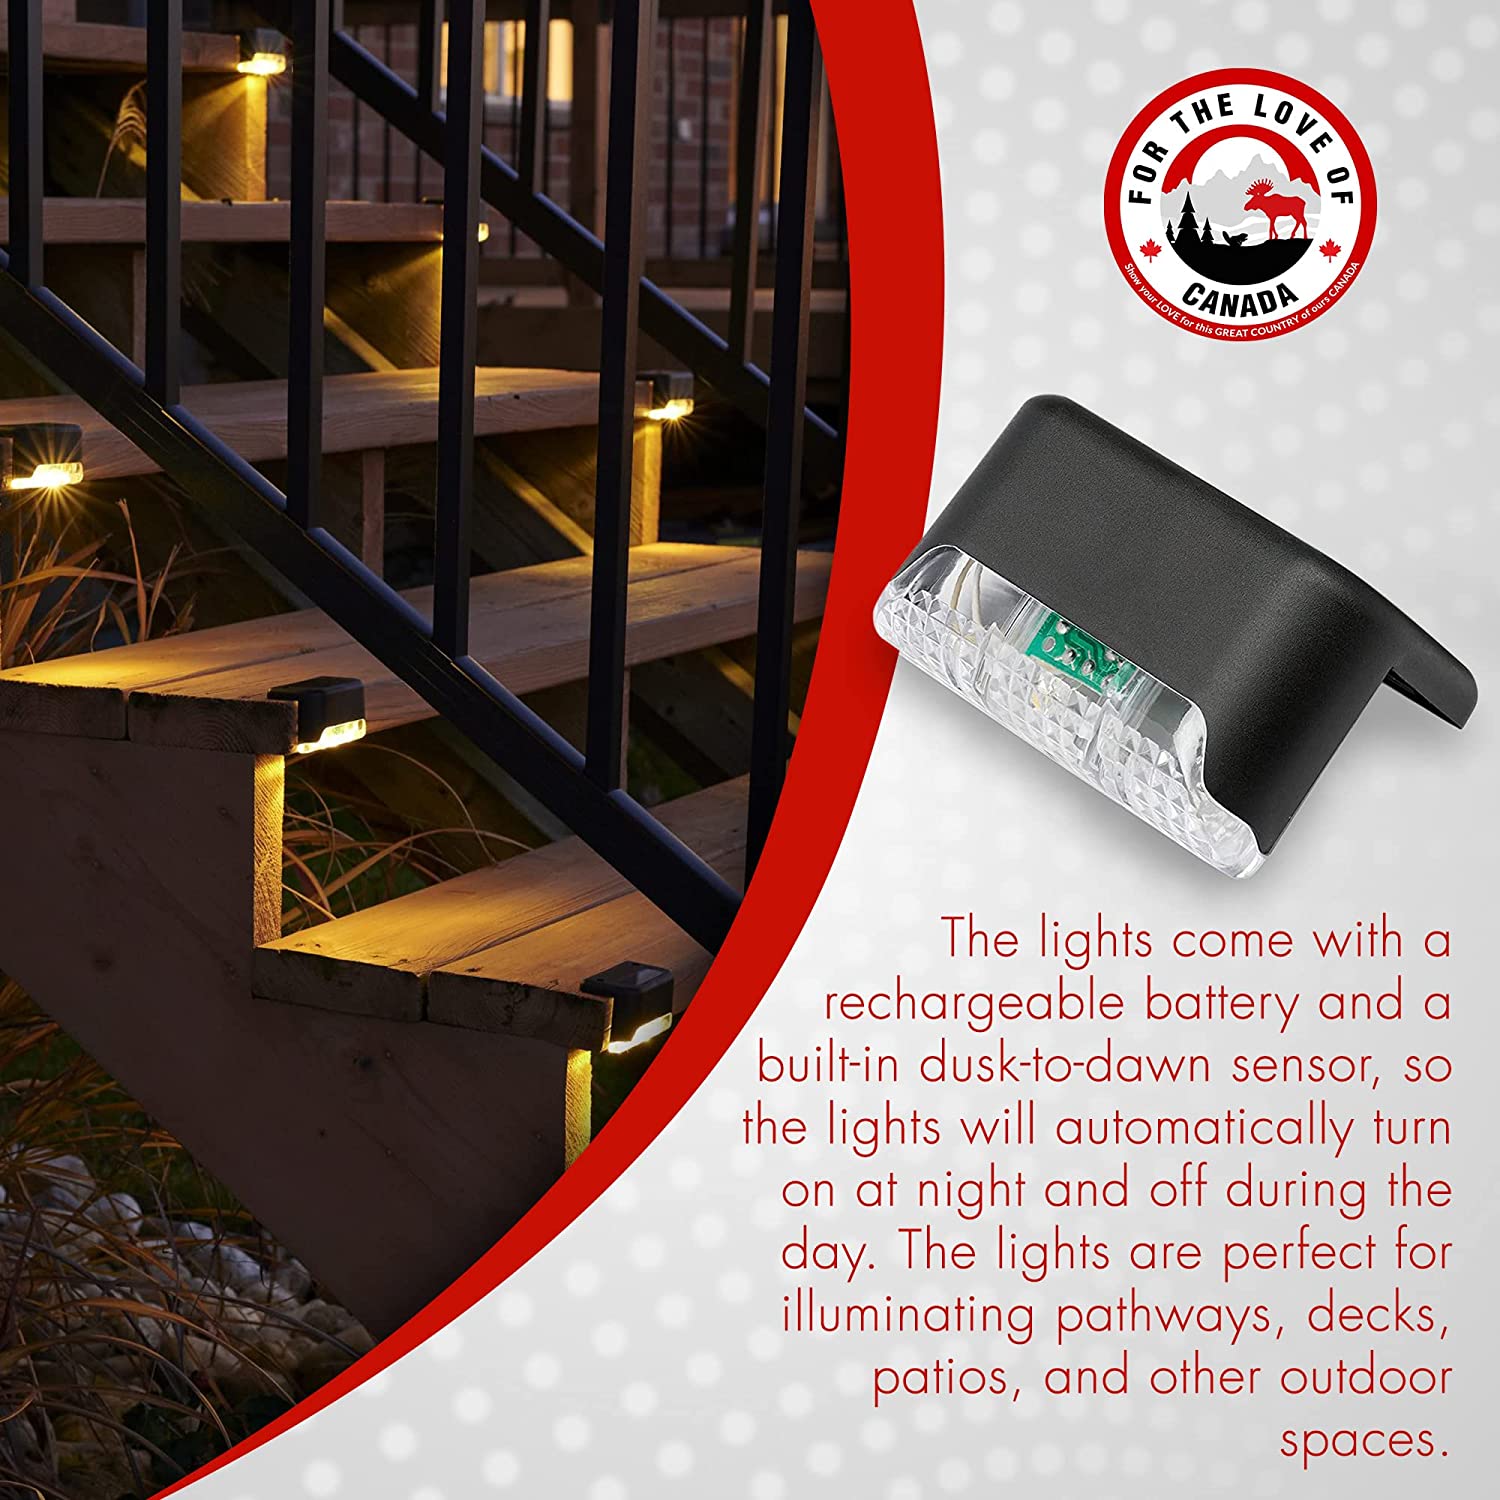 Solar Patio LED Lights. - For The Love Of Canada